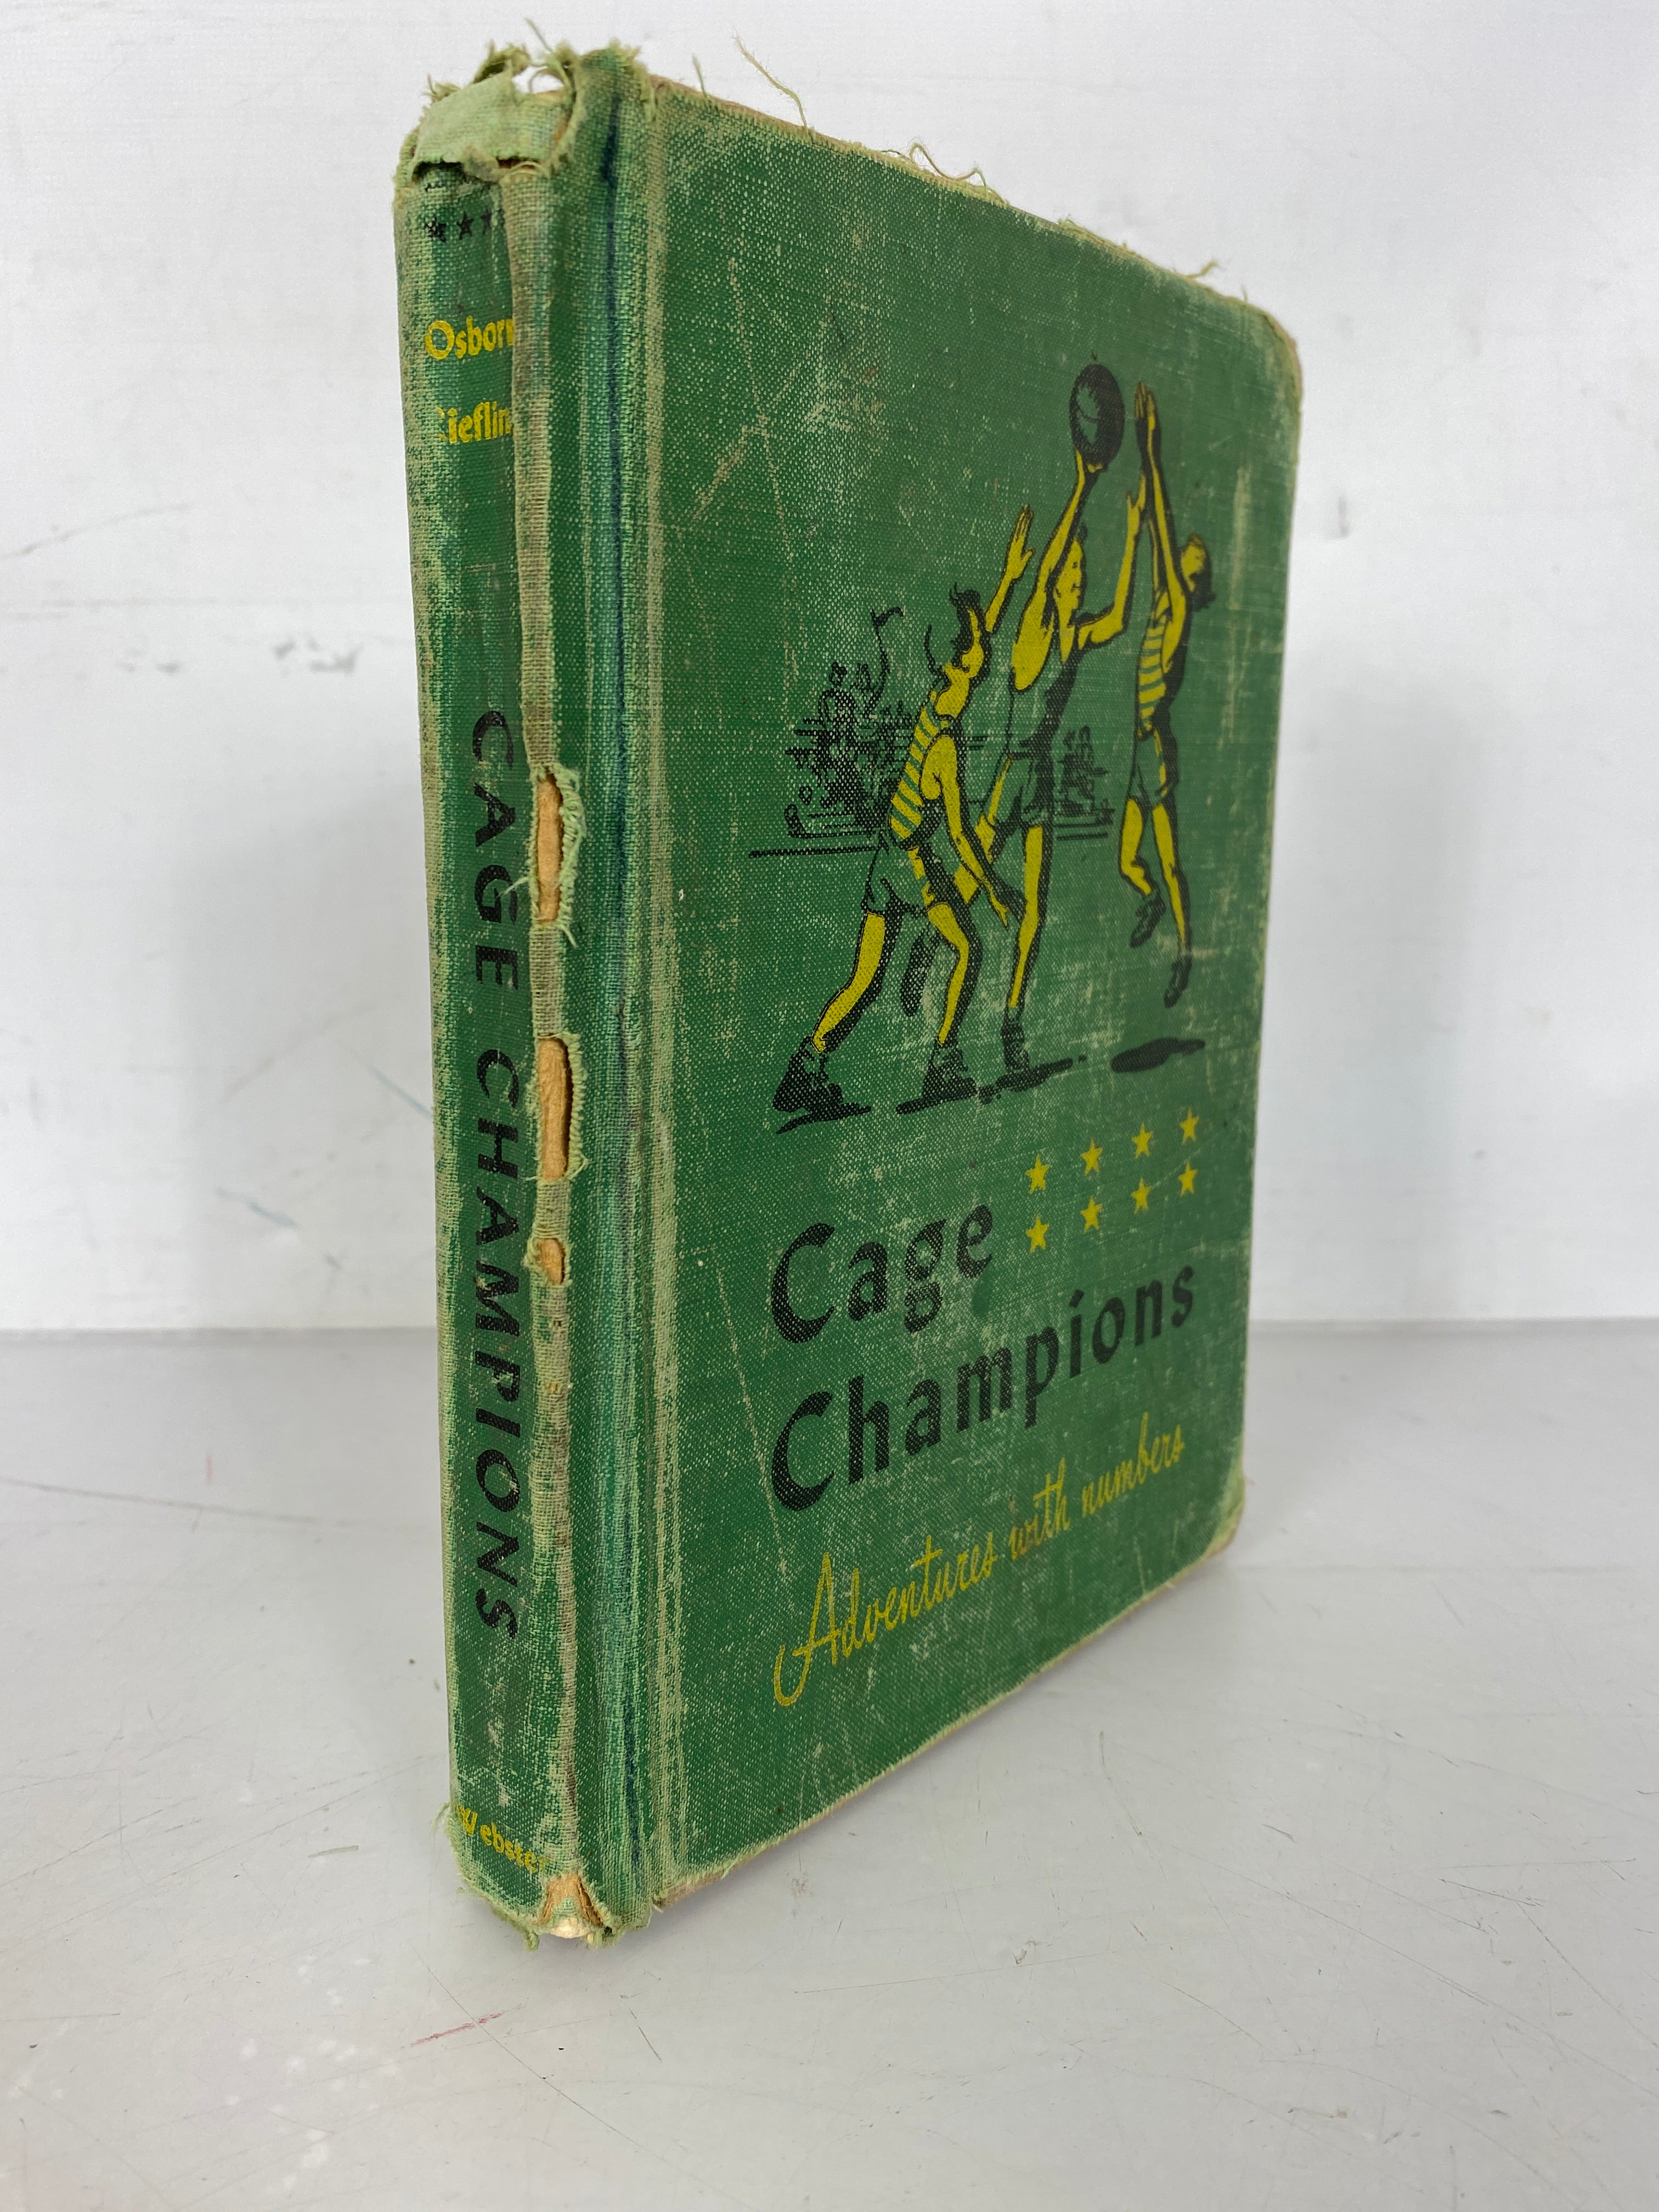 Cage Champions Adventures With Numbers Osborn and Riefling 1953 HC